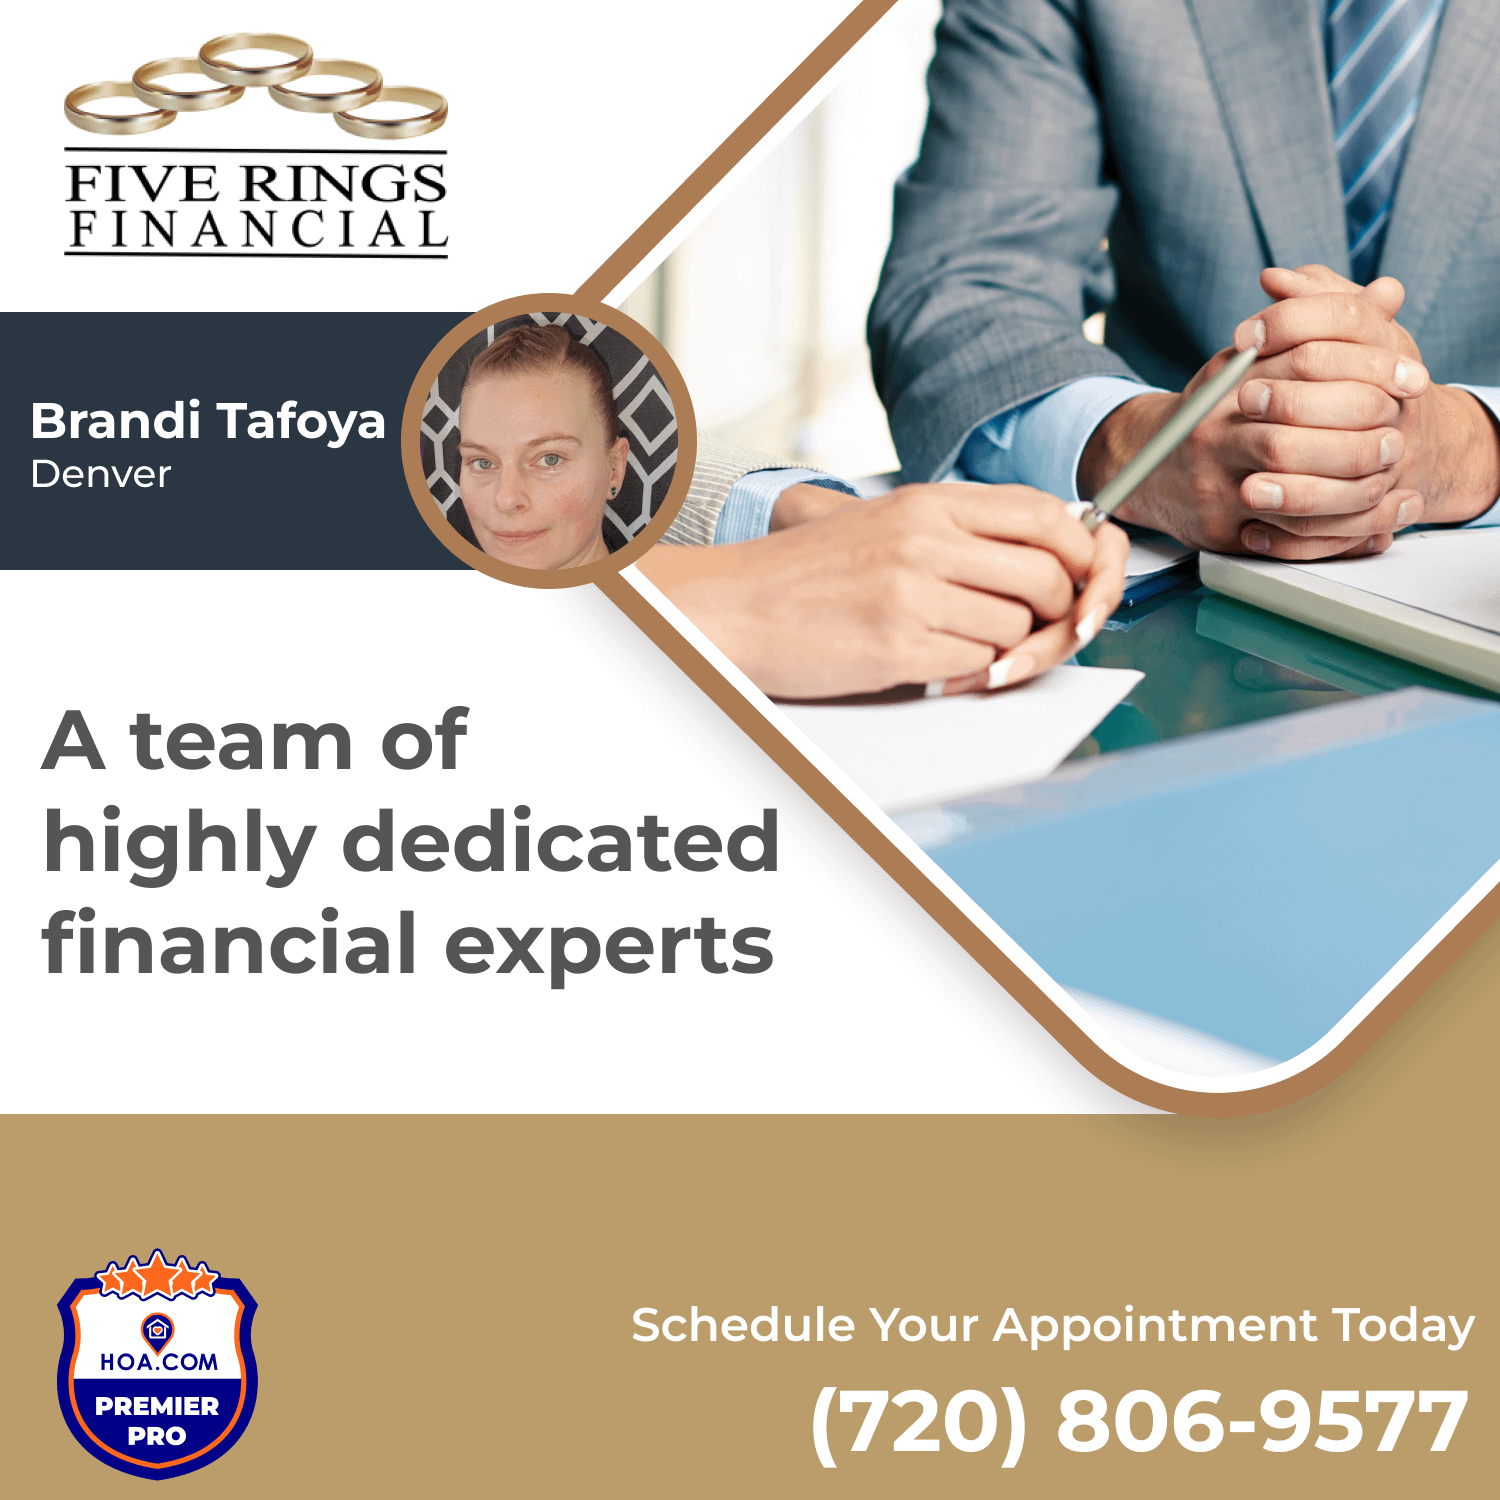 Highle exeperienced financial experts